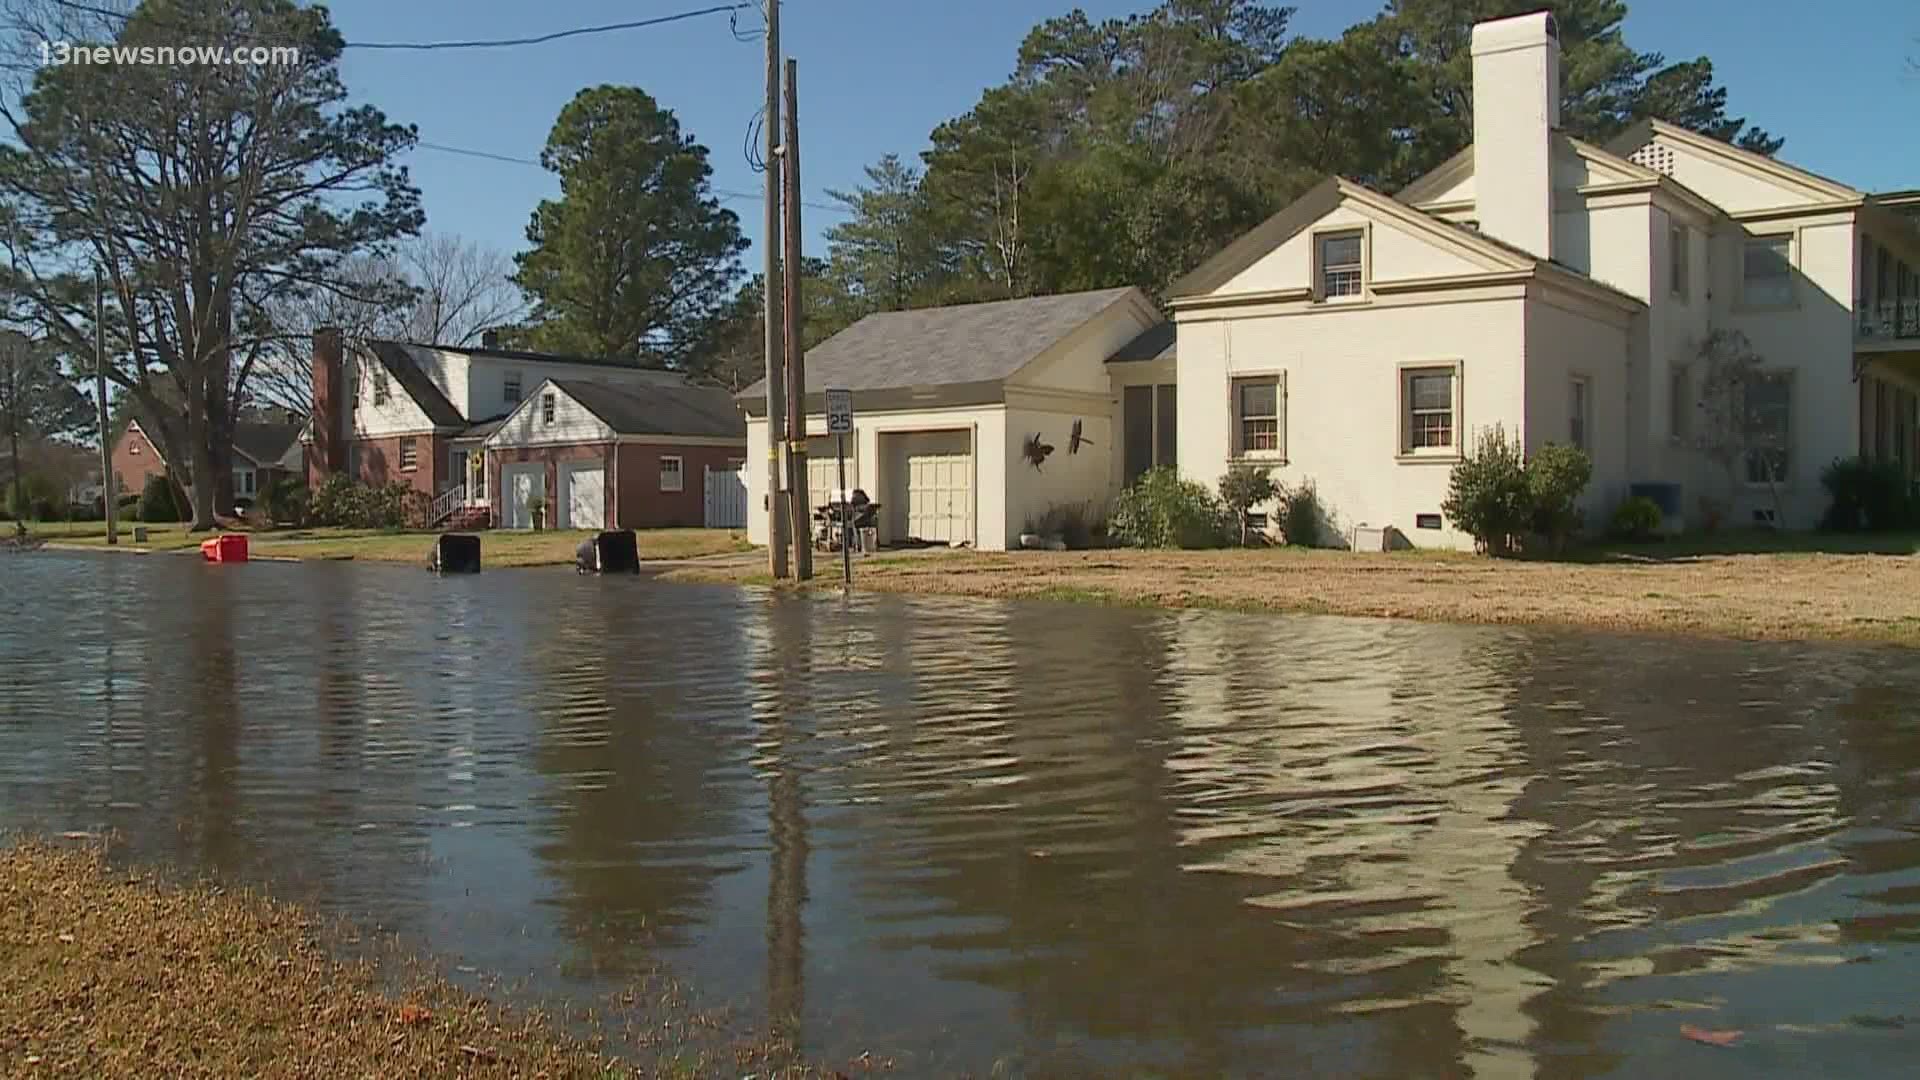 The national program that most of us get our flood insurance through is going to see major changes starting this October.